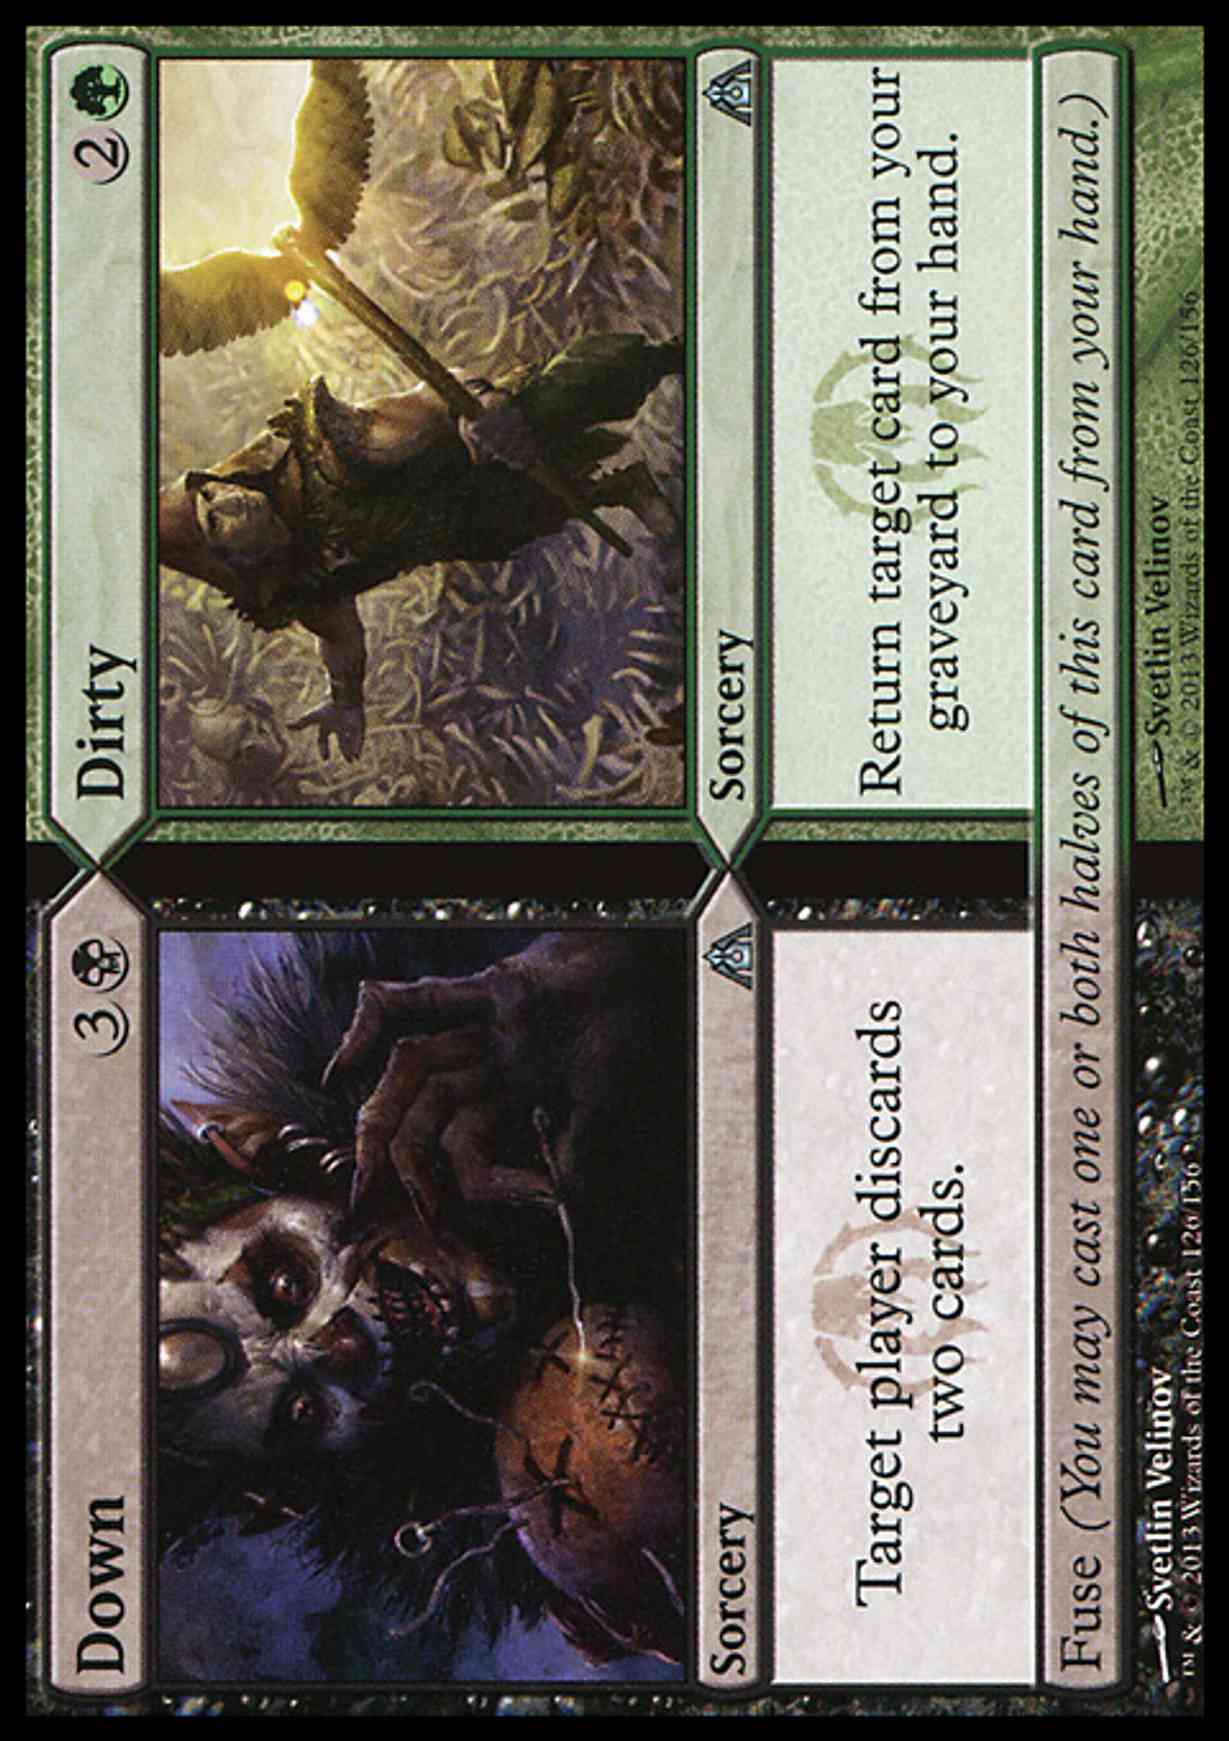 Down // Dirty magic card front